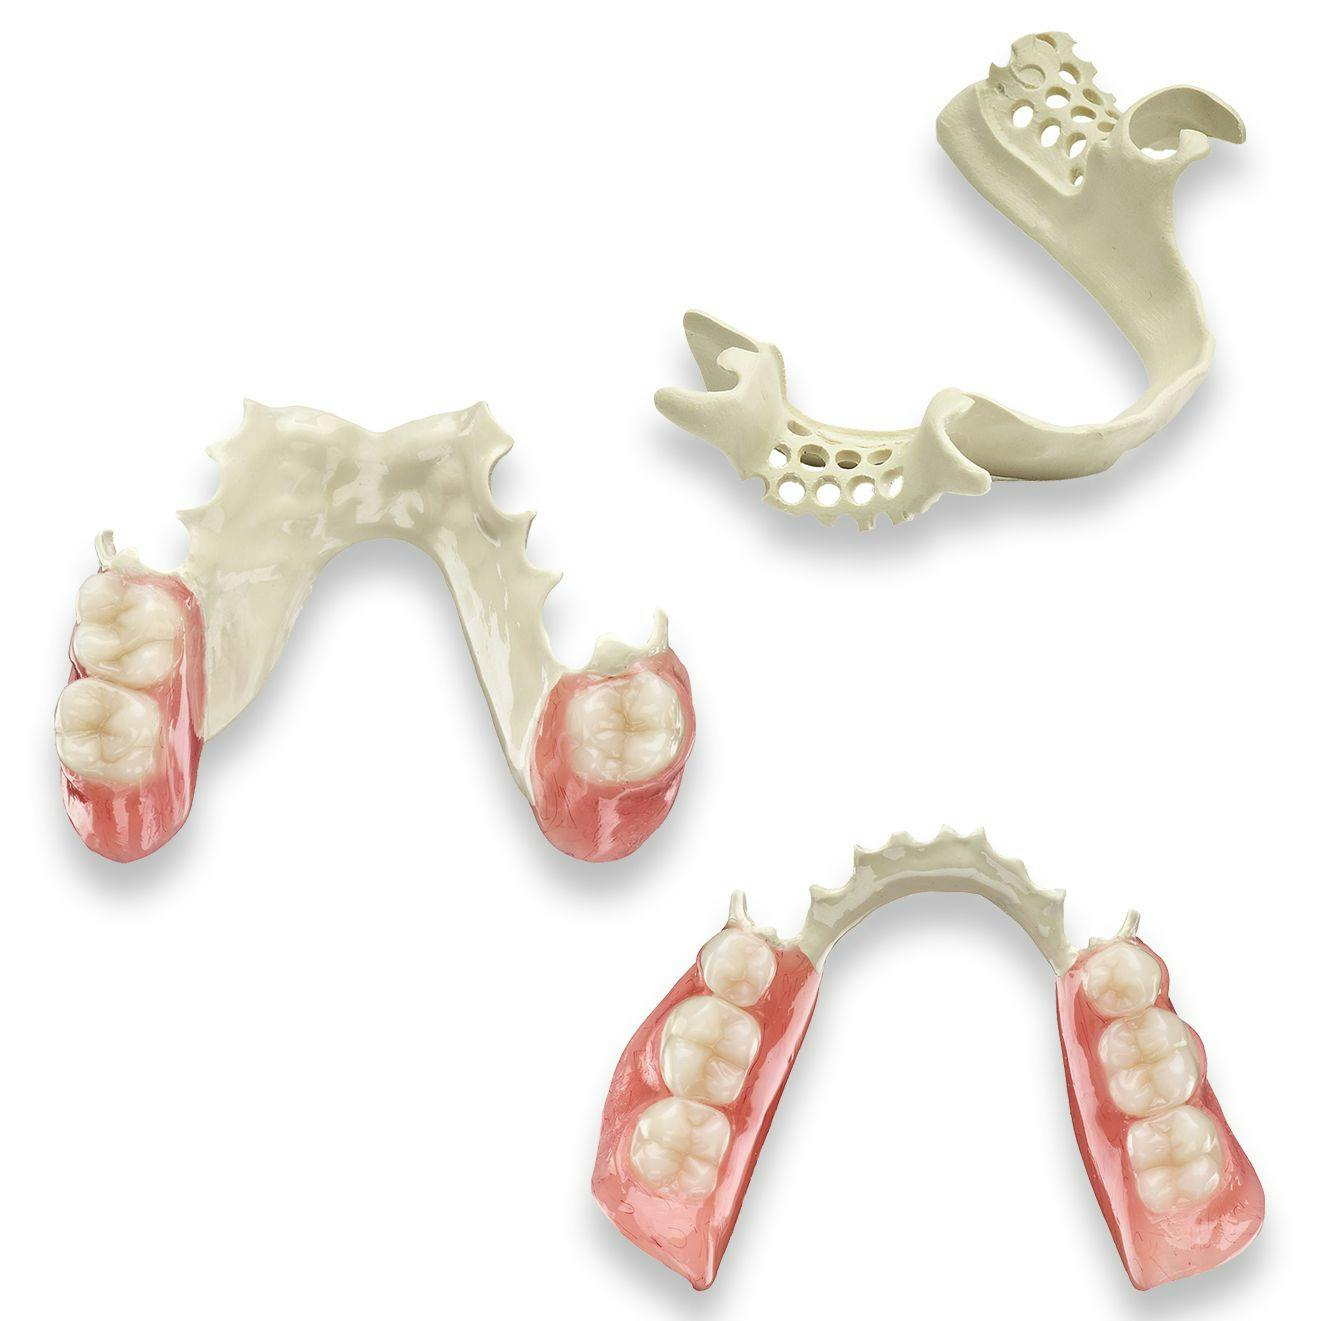 Dentivera milling discs used to create removable partials.